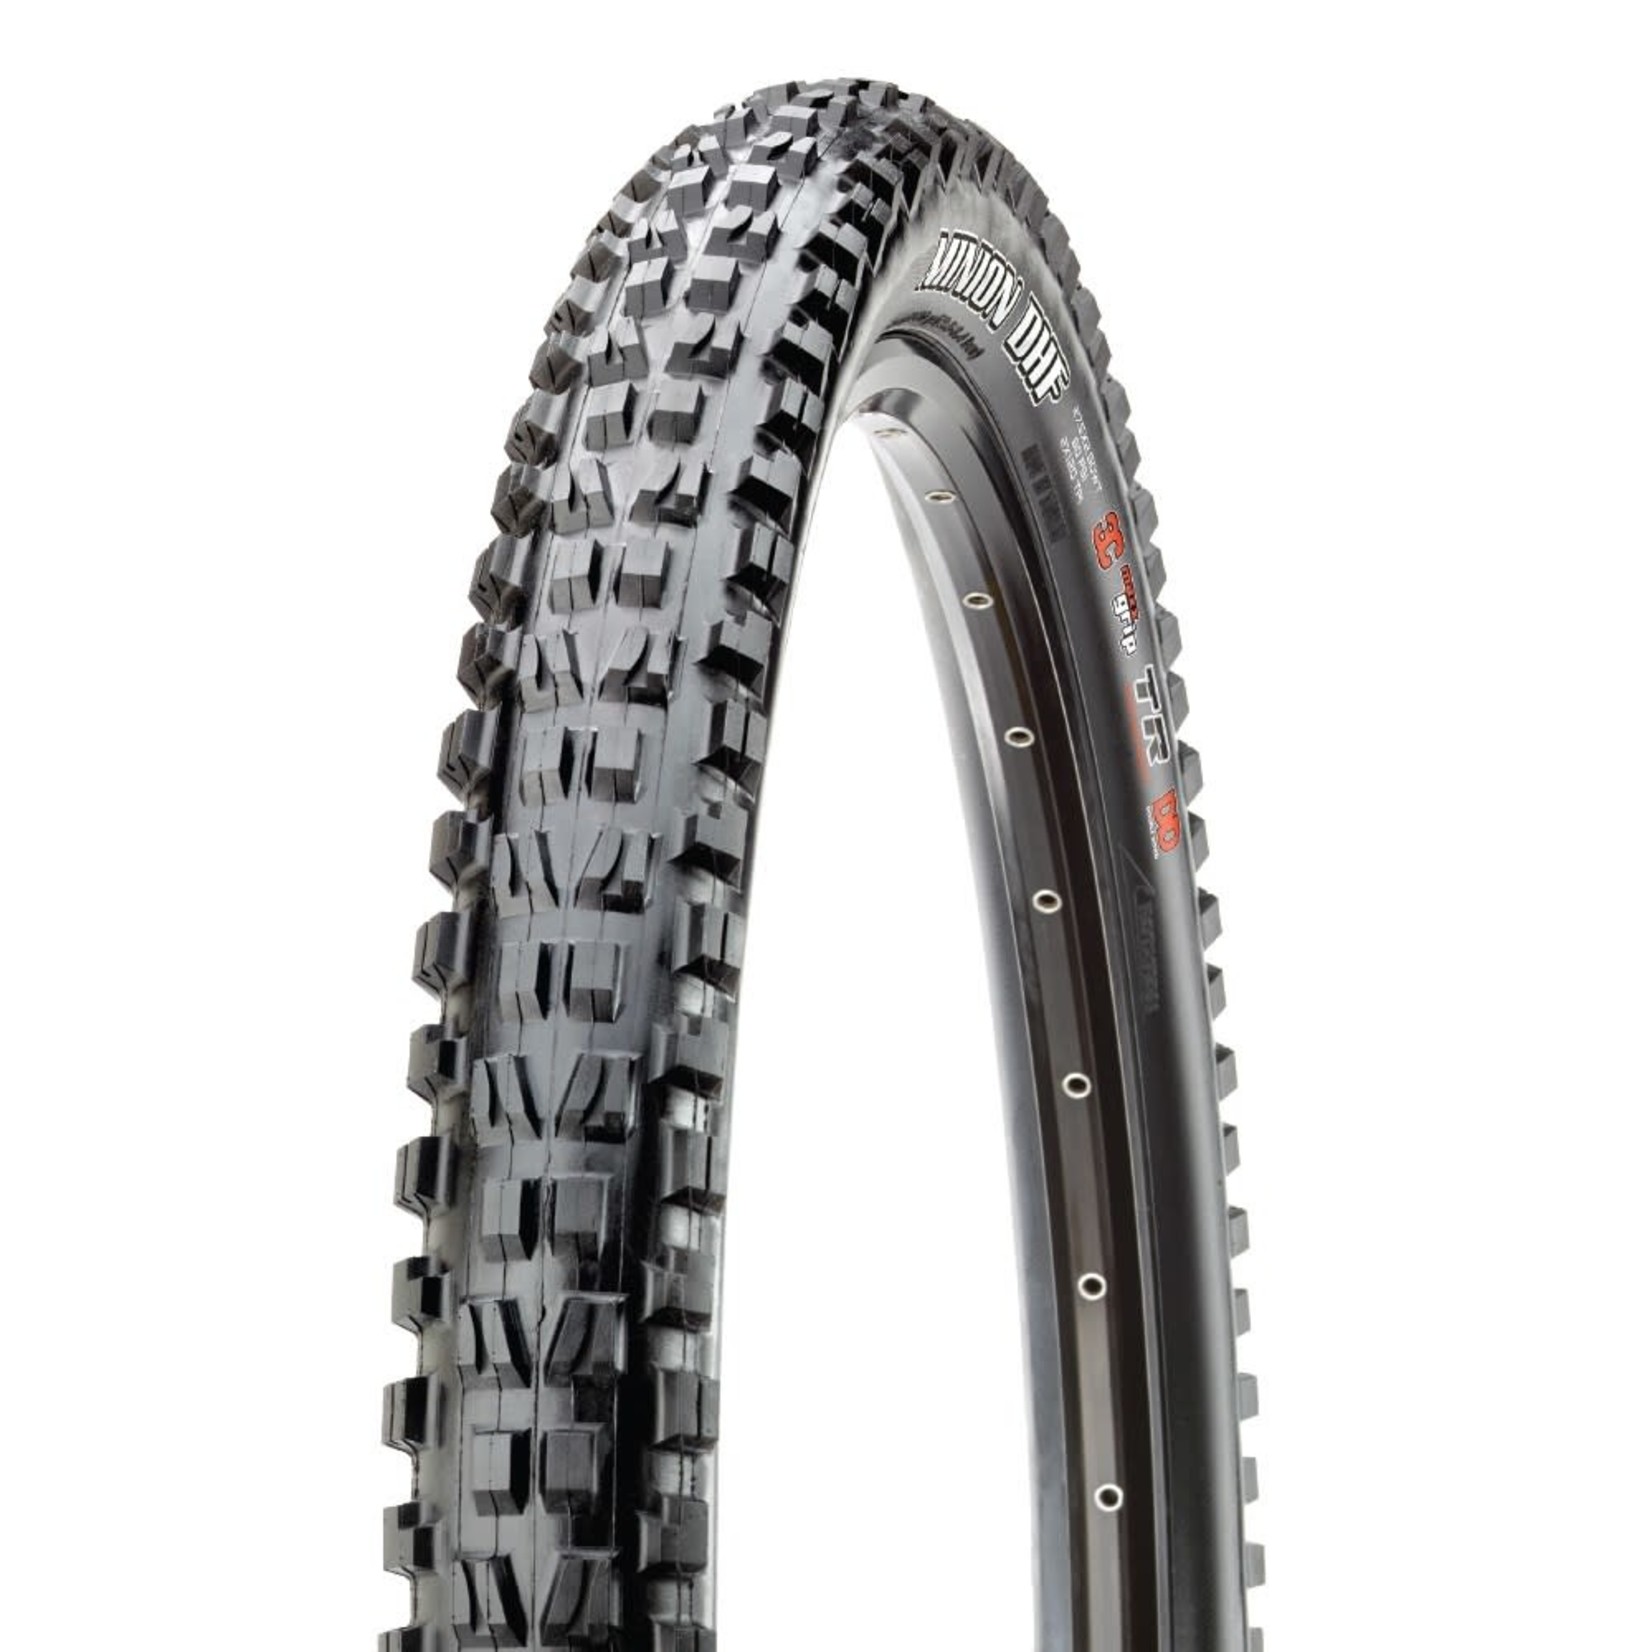 Maxxis Maxxis Minion DHF Bike Tyre - 29 X 2.50 - EXO Wire Bead Tyre - 60TPI - Pair